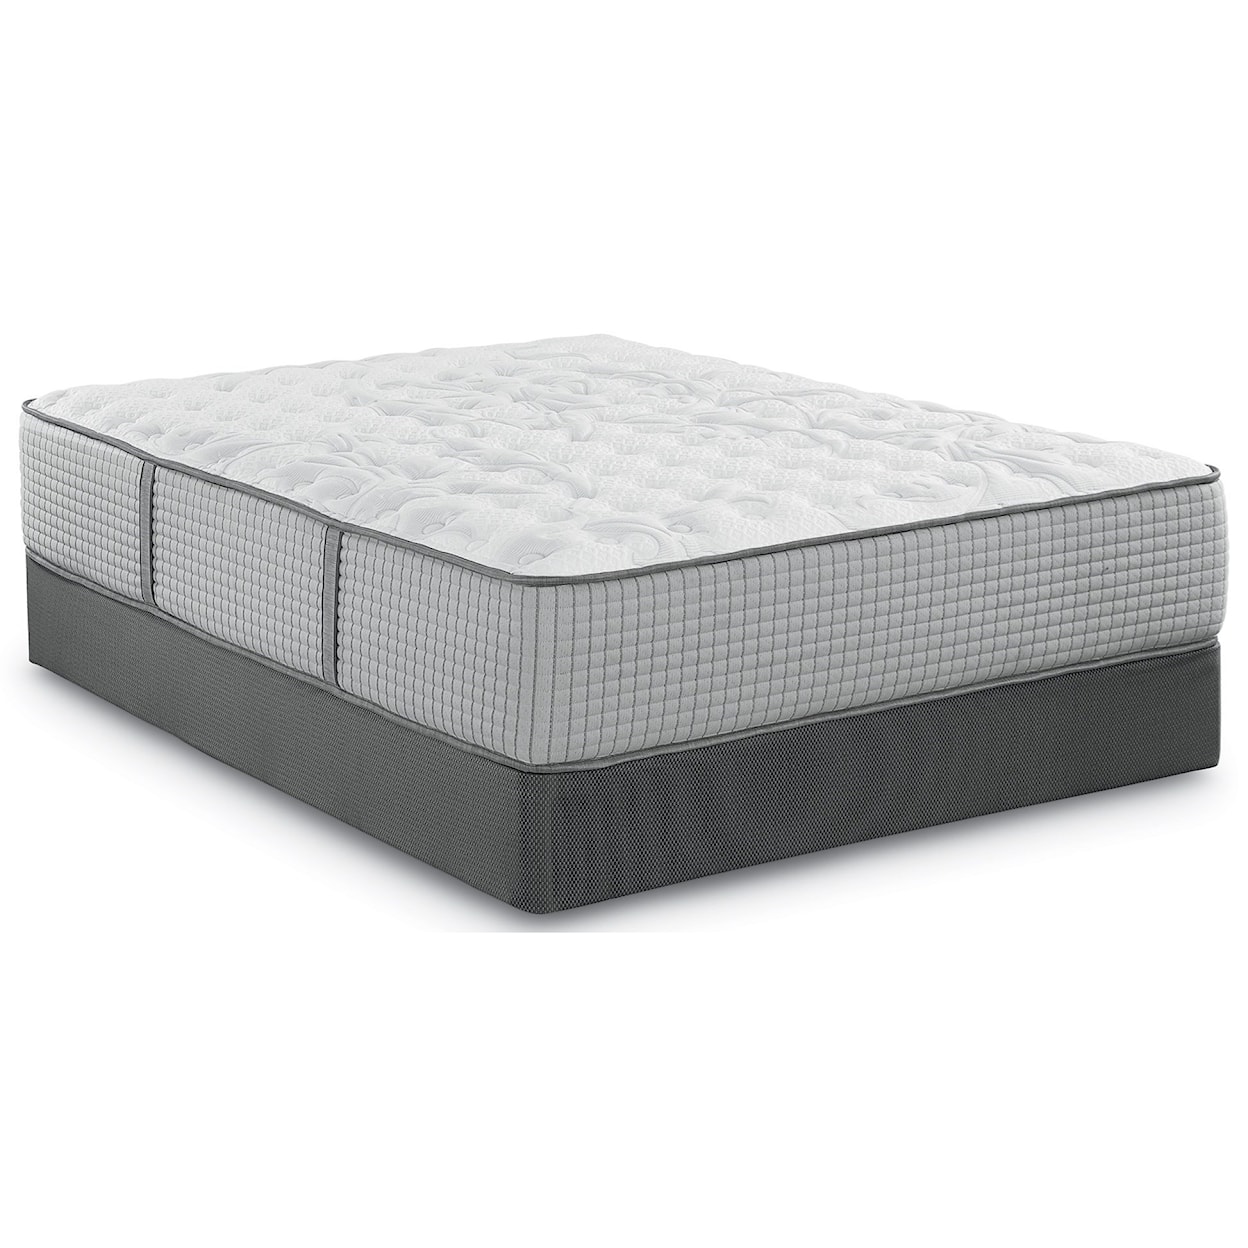 Restonic Biltmore House Firm Twin Firm Coil on Coil Mattress Set